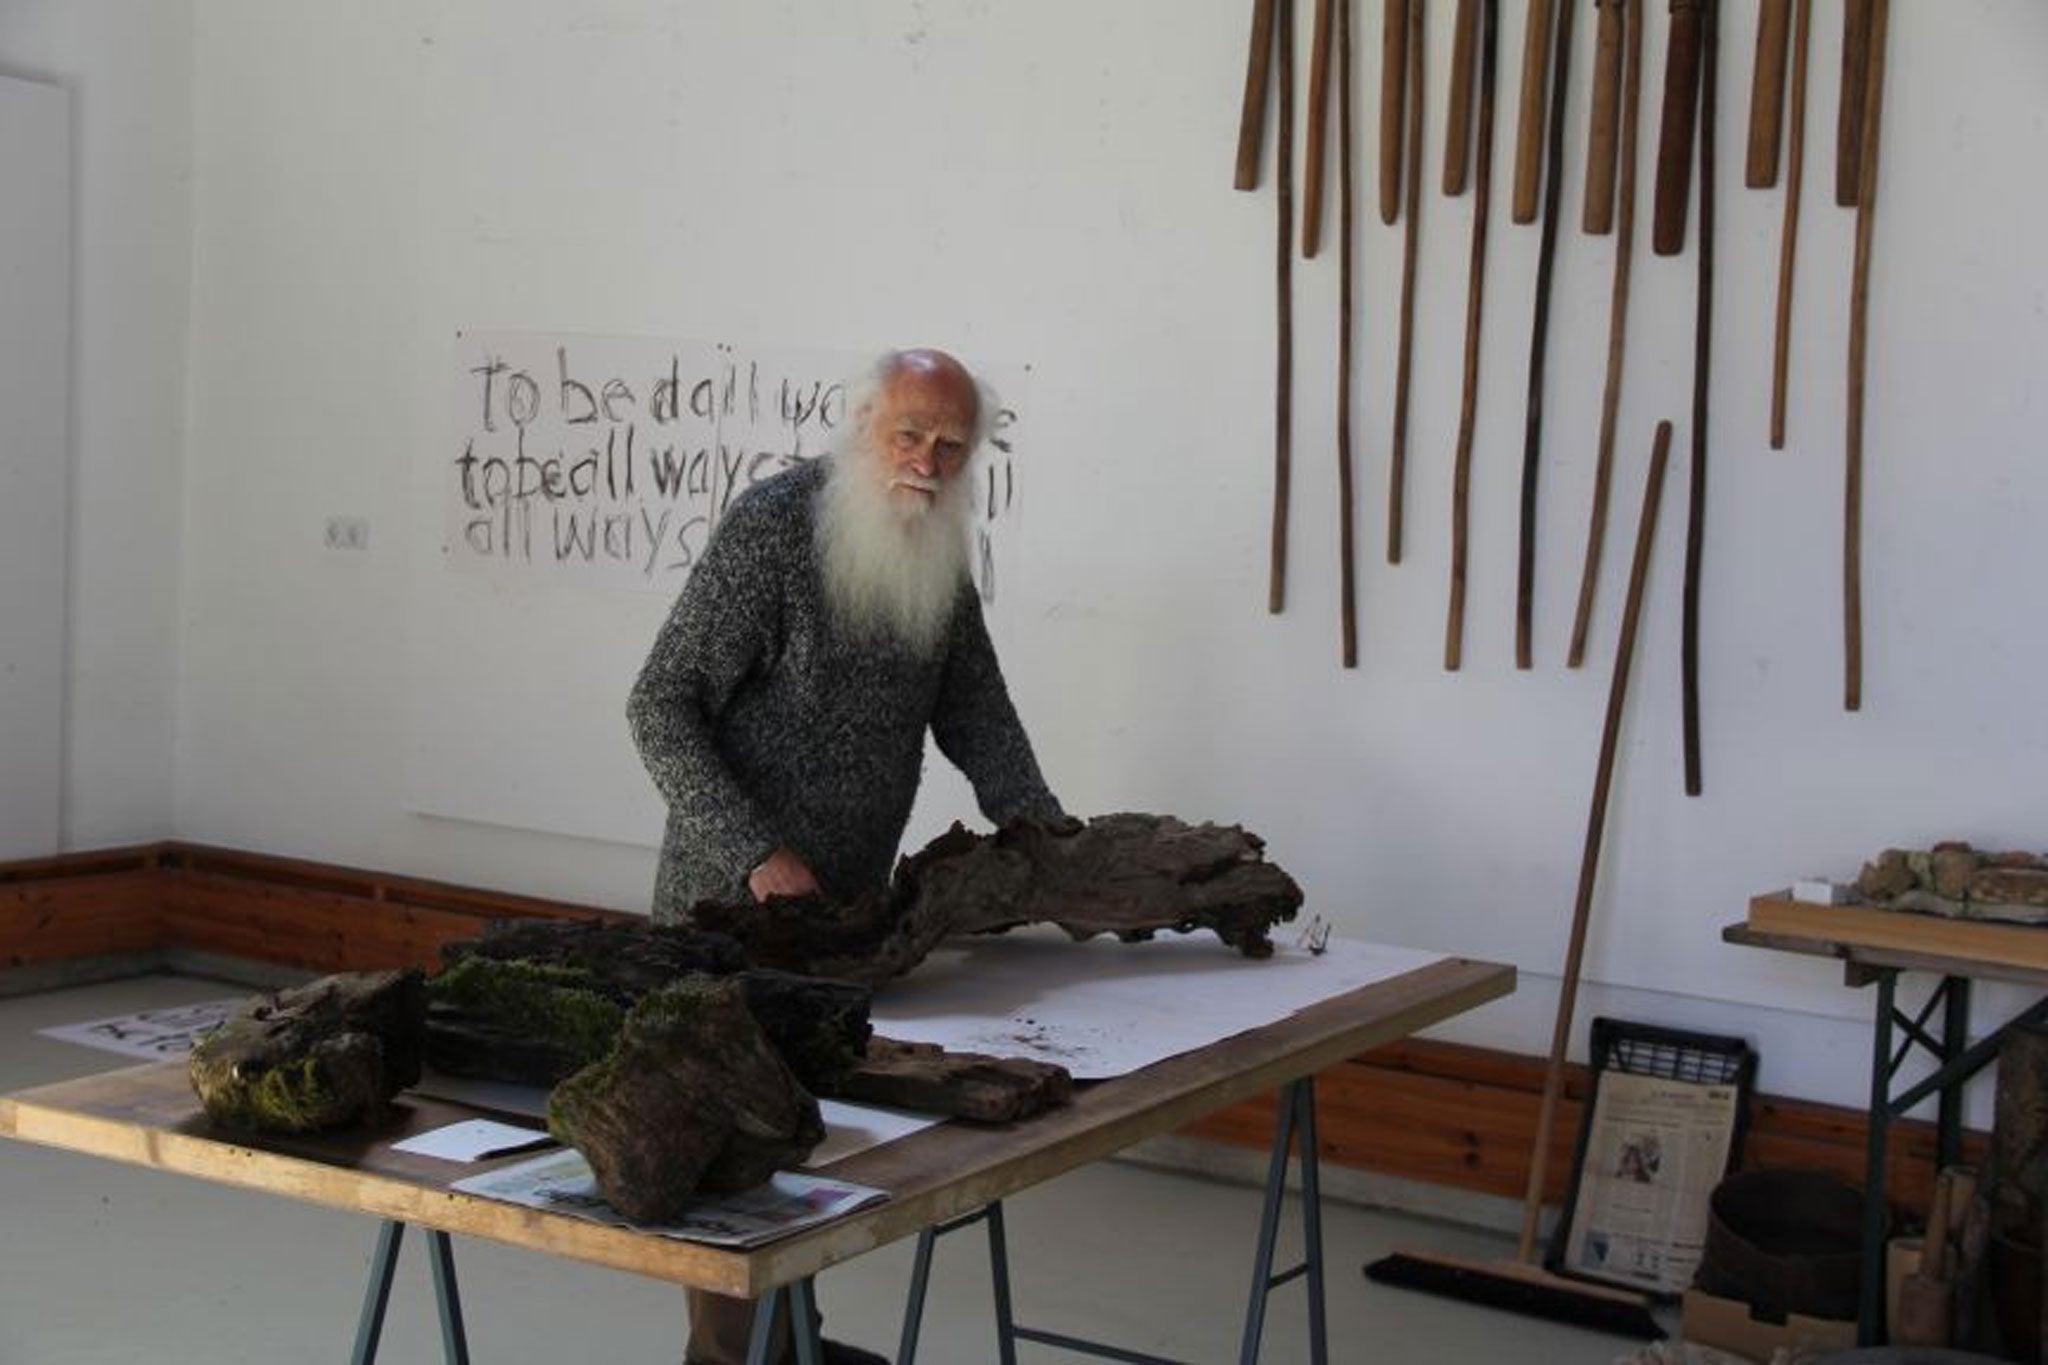 At one with nature: de vries at work in his Black Forest studio